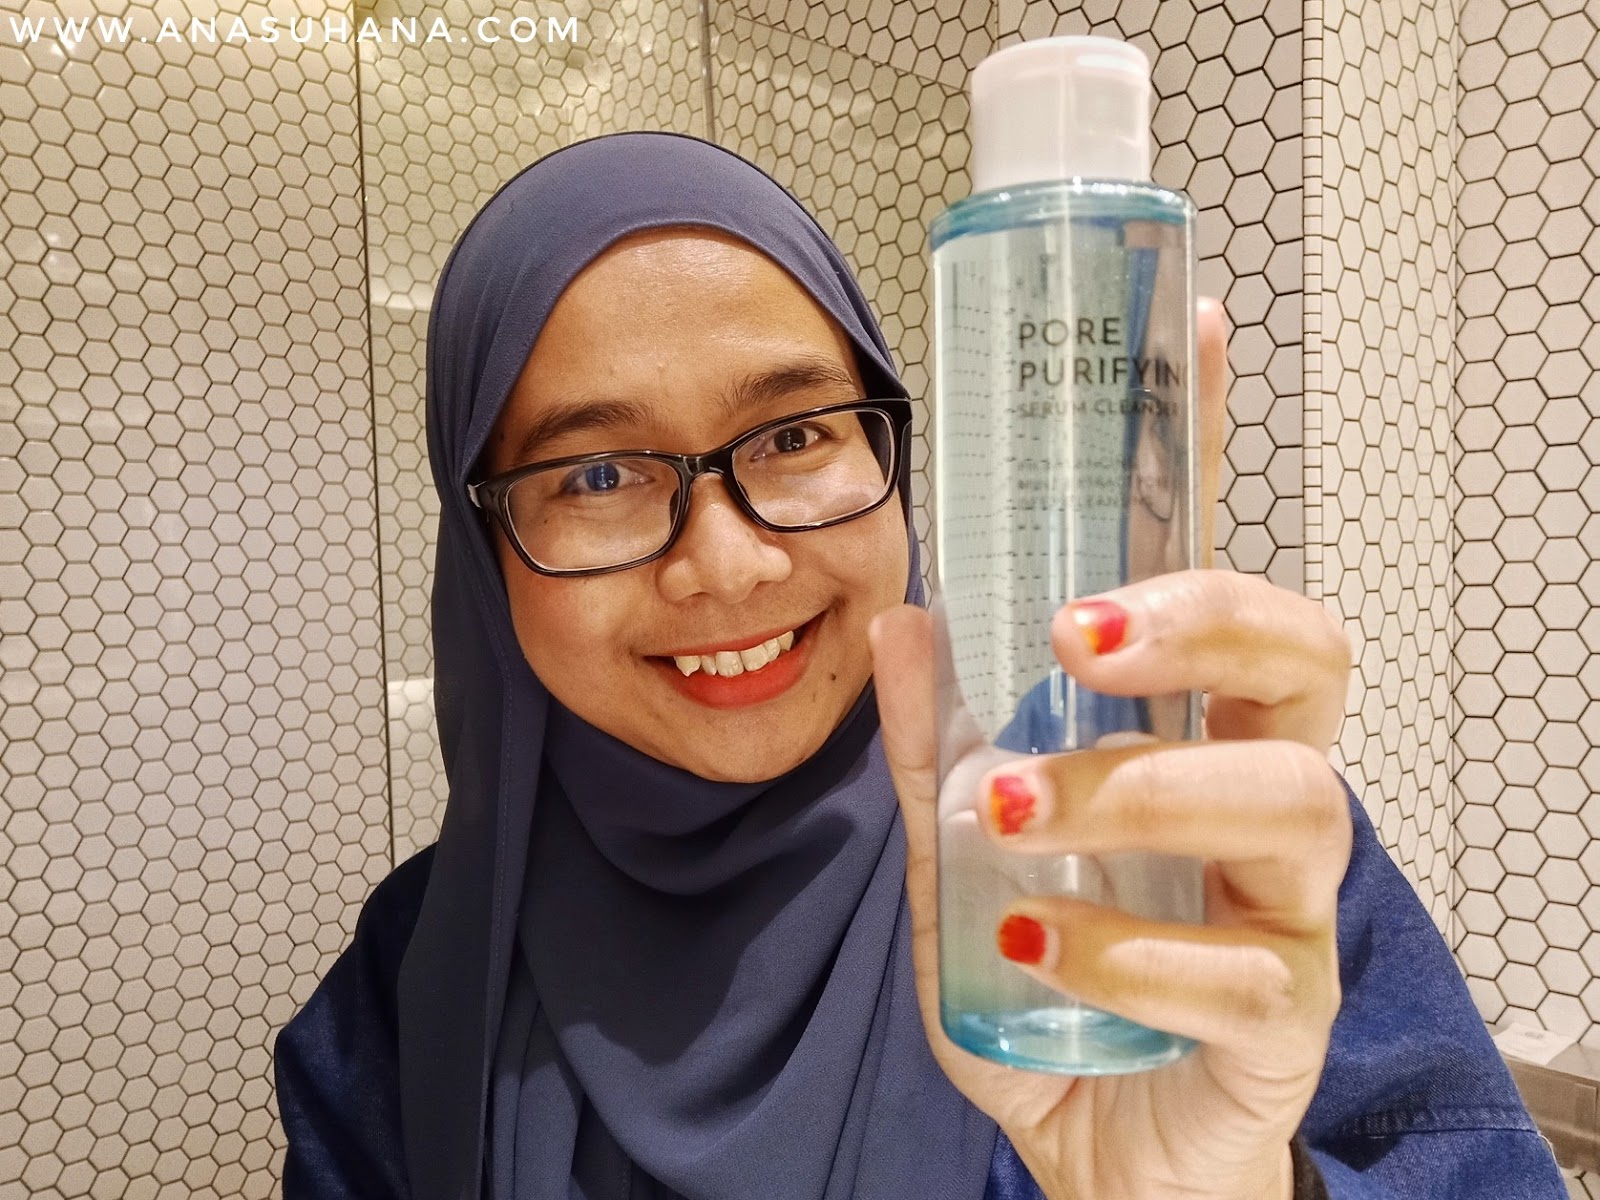 Althea's Pore Purifying Serum Cleanser